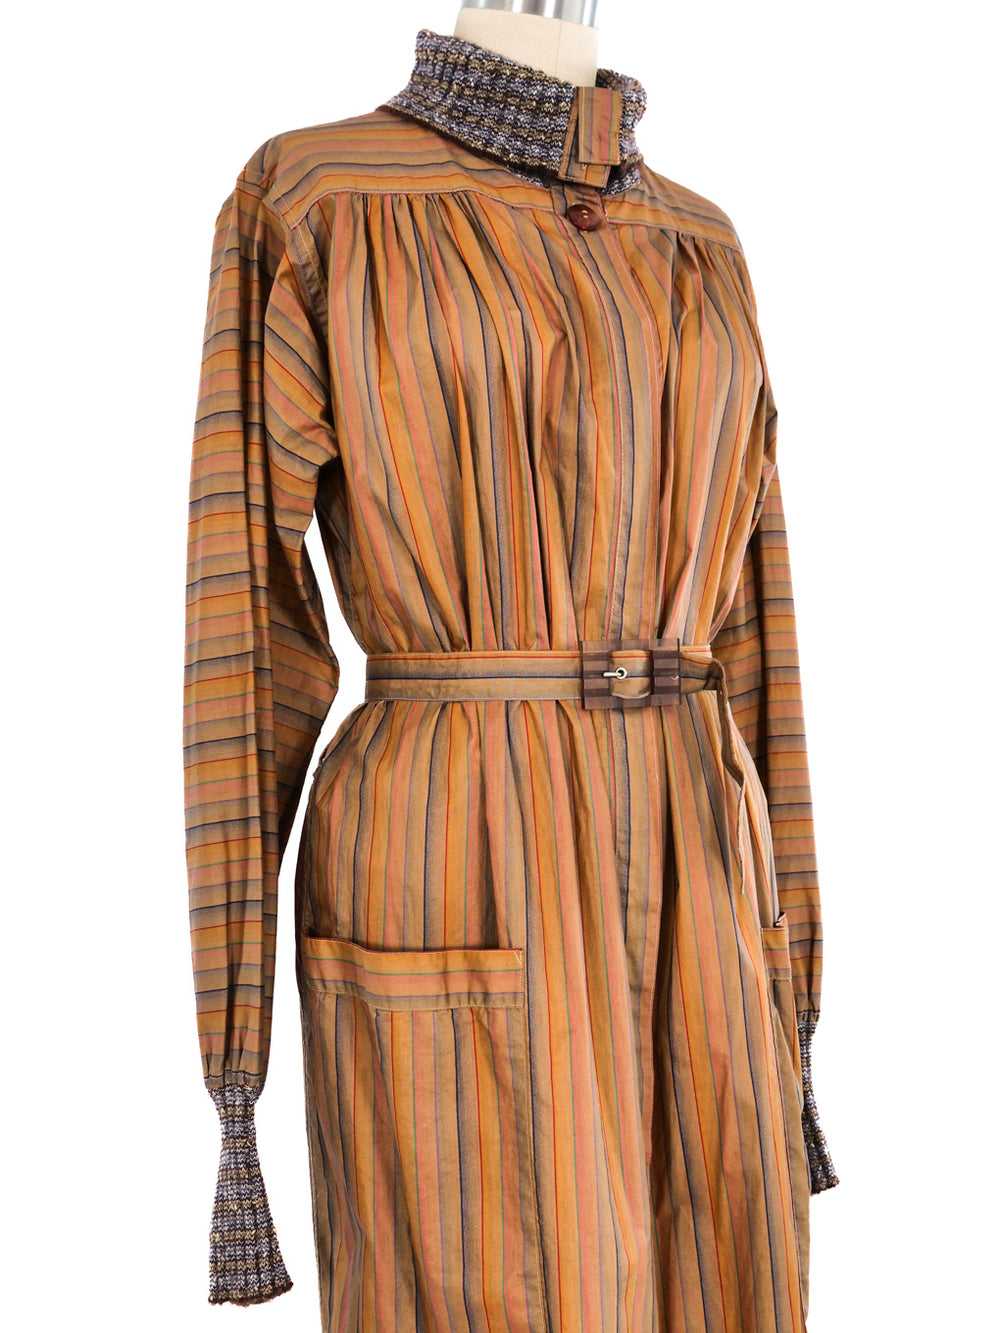 1970's Missoni Striped Belted Coat - image 2